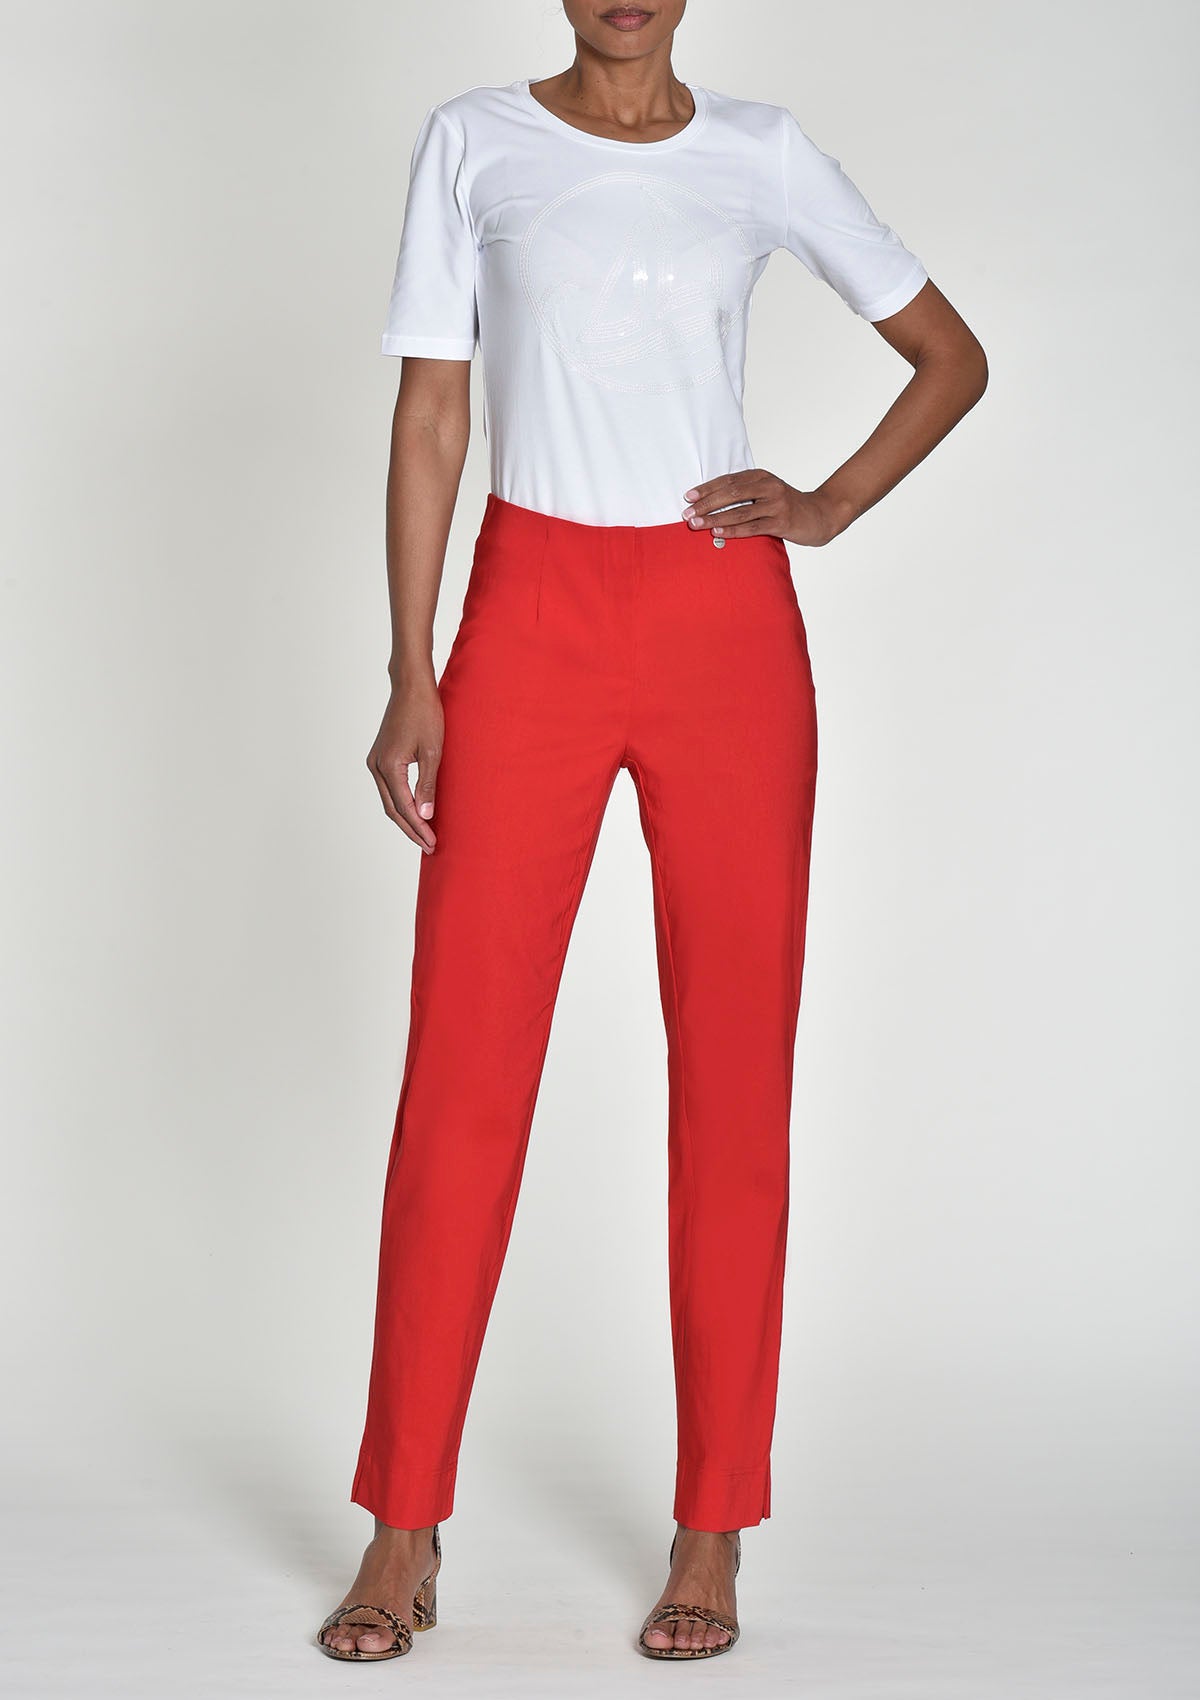 TROUSERS   BENGALIN MARIE SHORT FIT  -  ROBELL  51412 5499